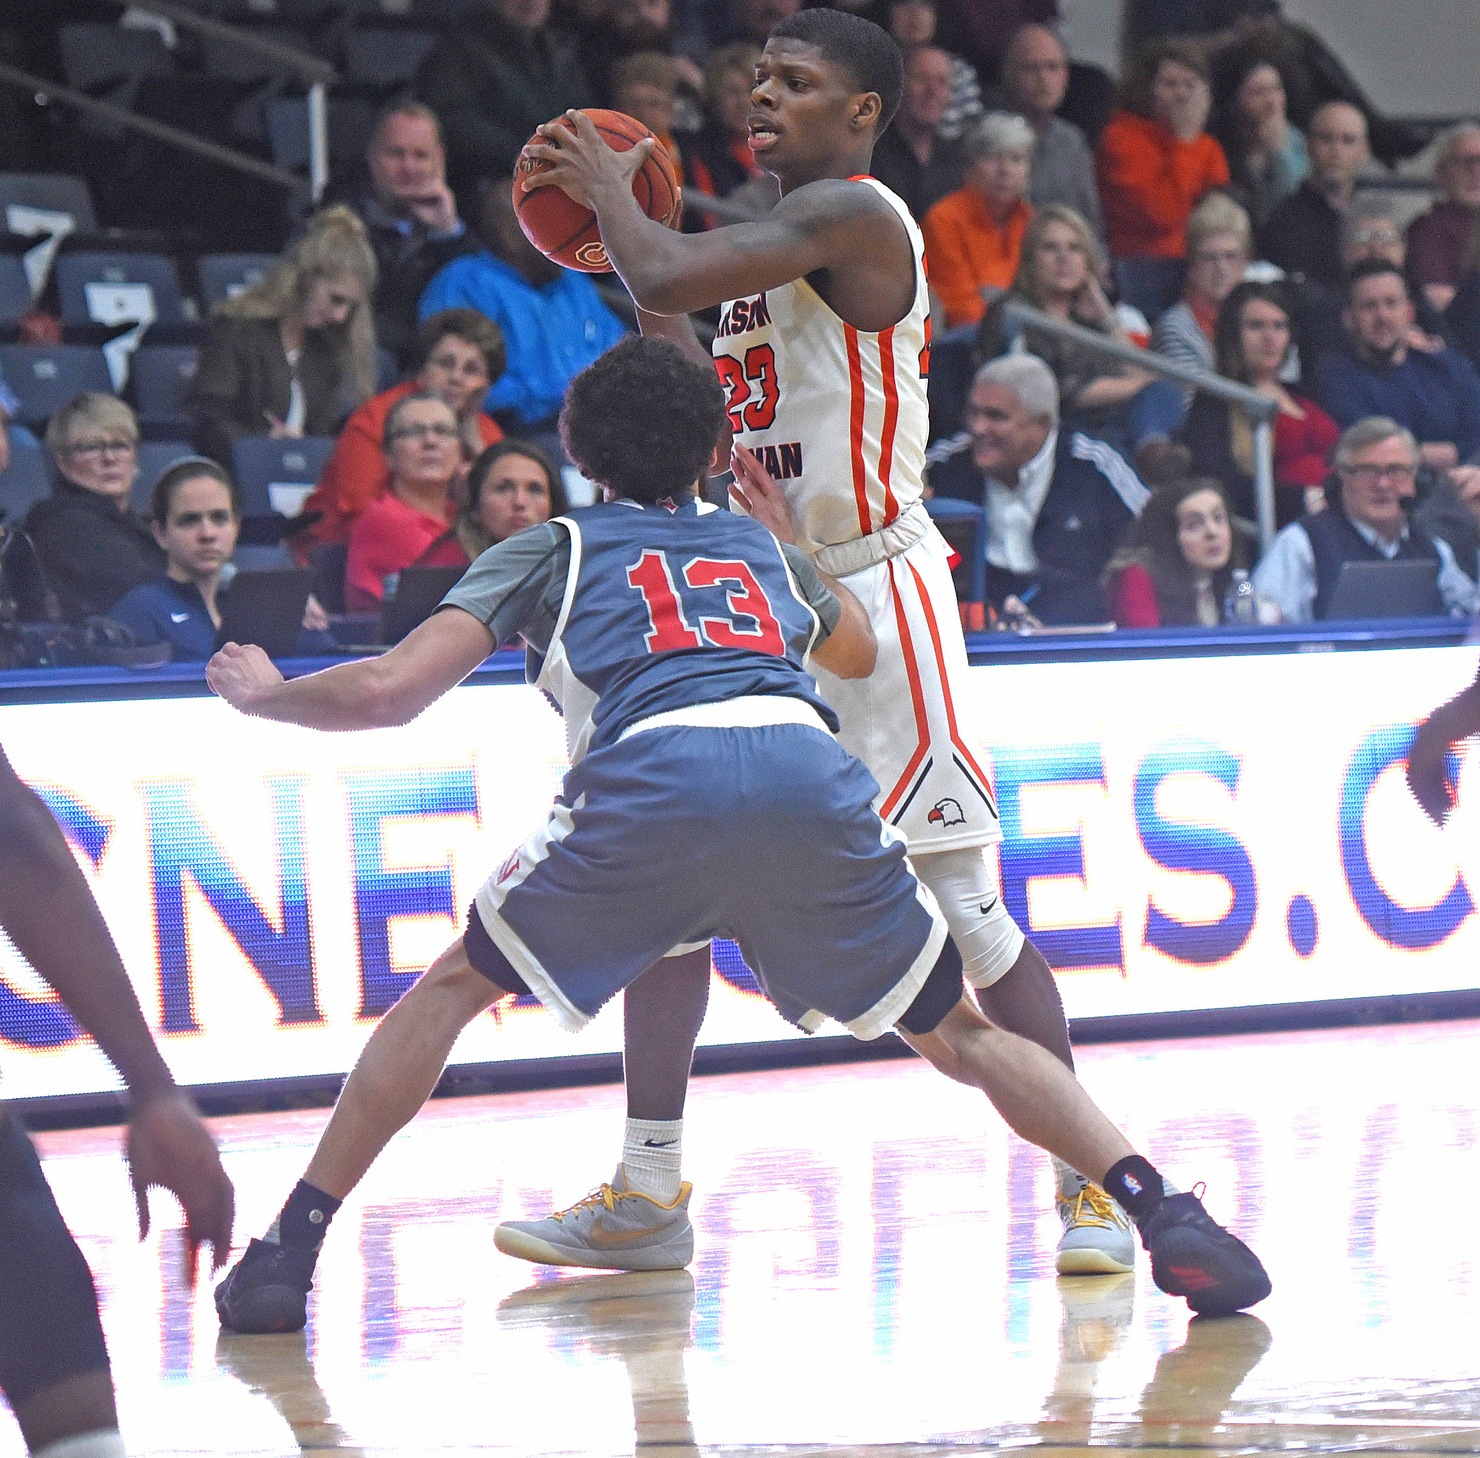 Carson-Newman tries to right ship against up-tempo Wolves